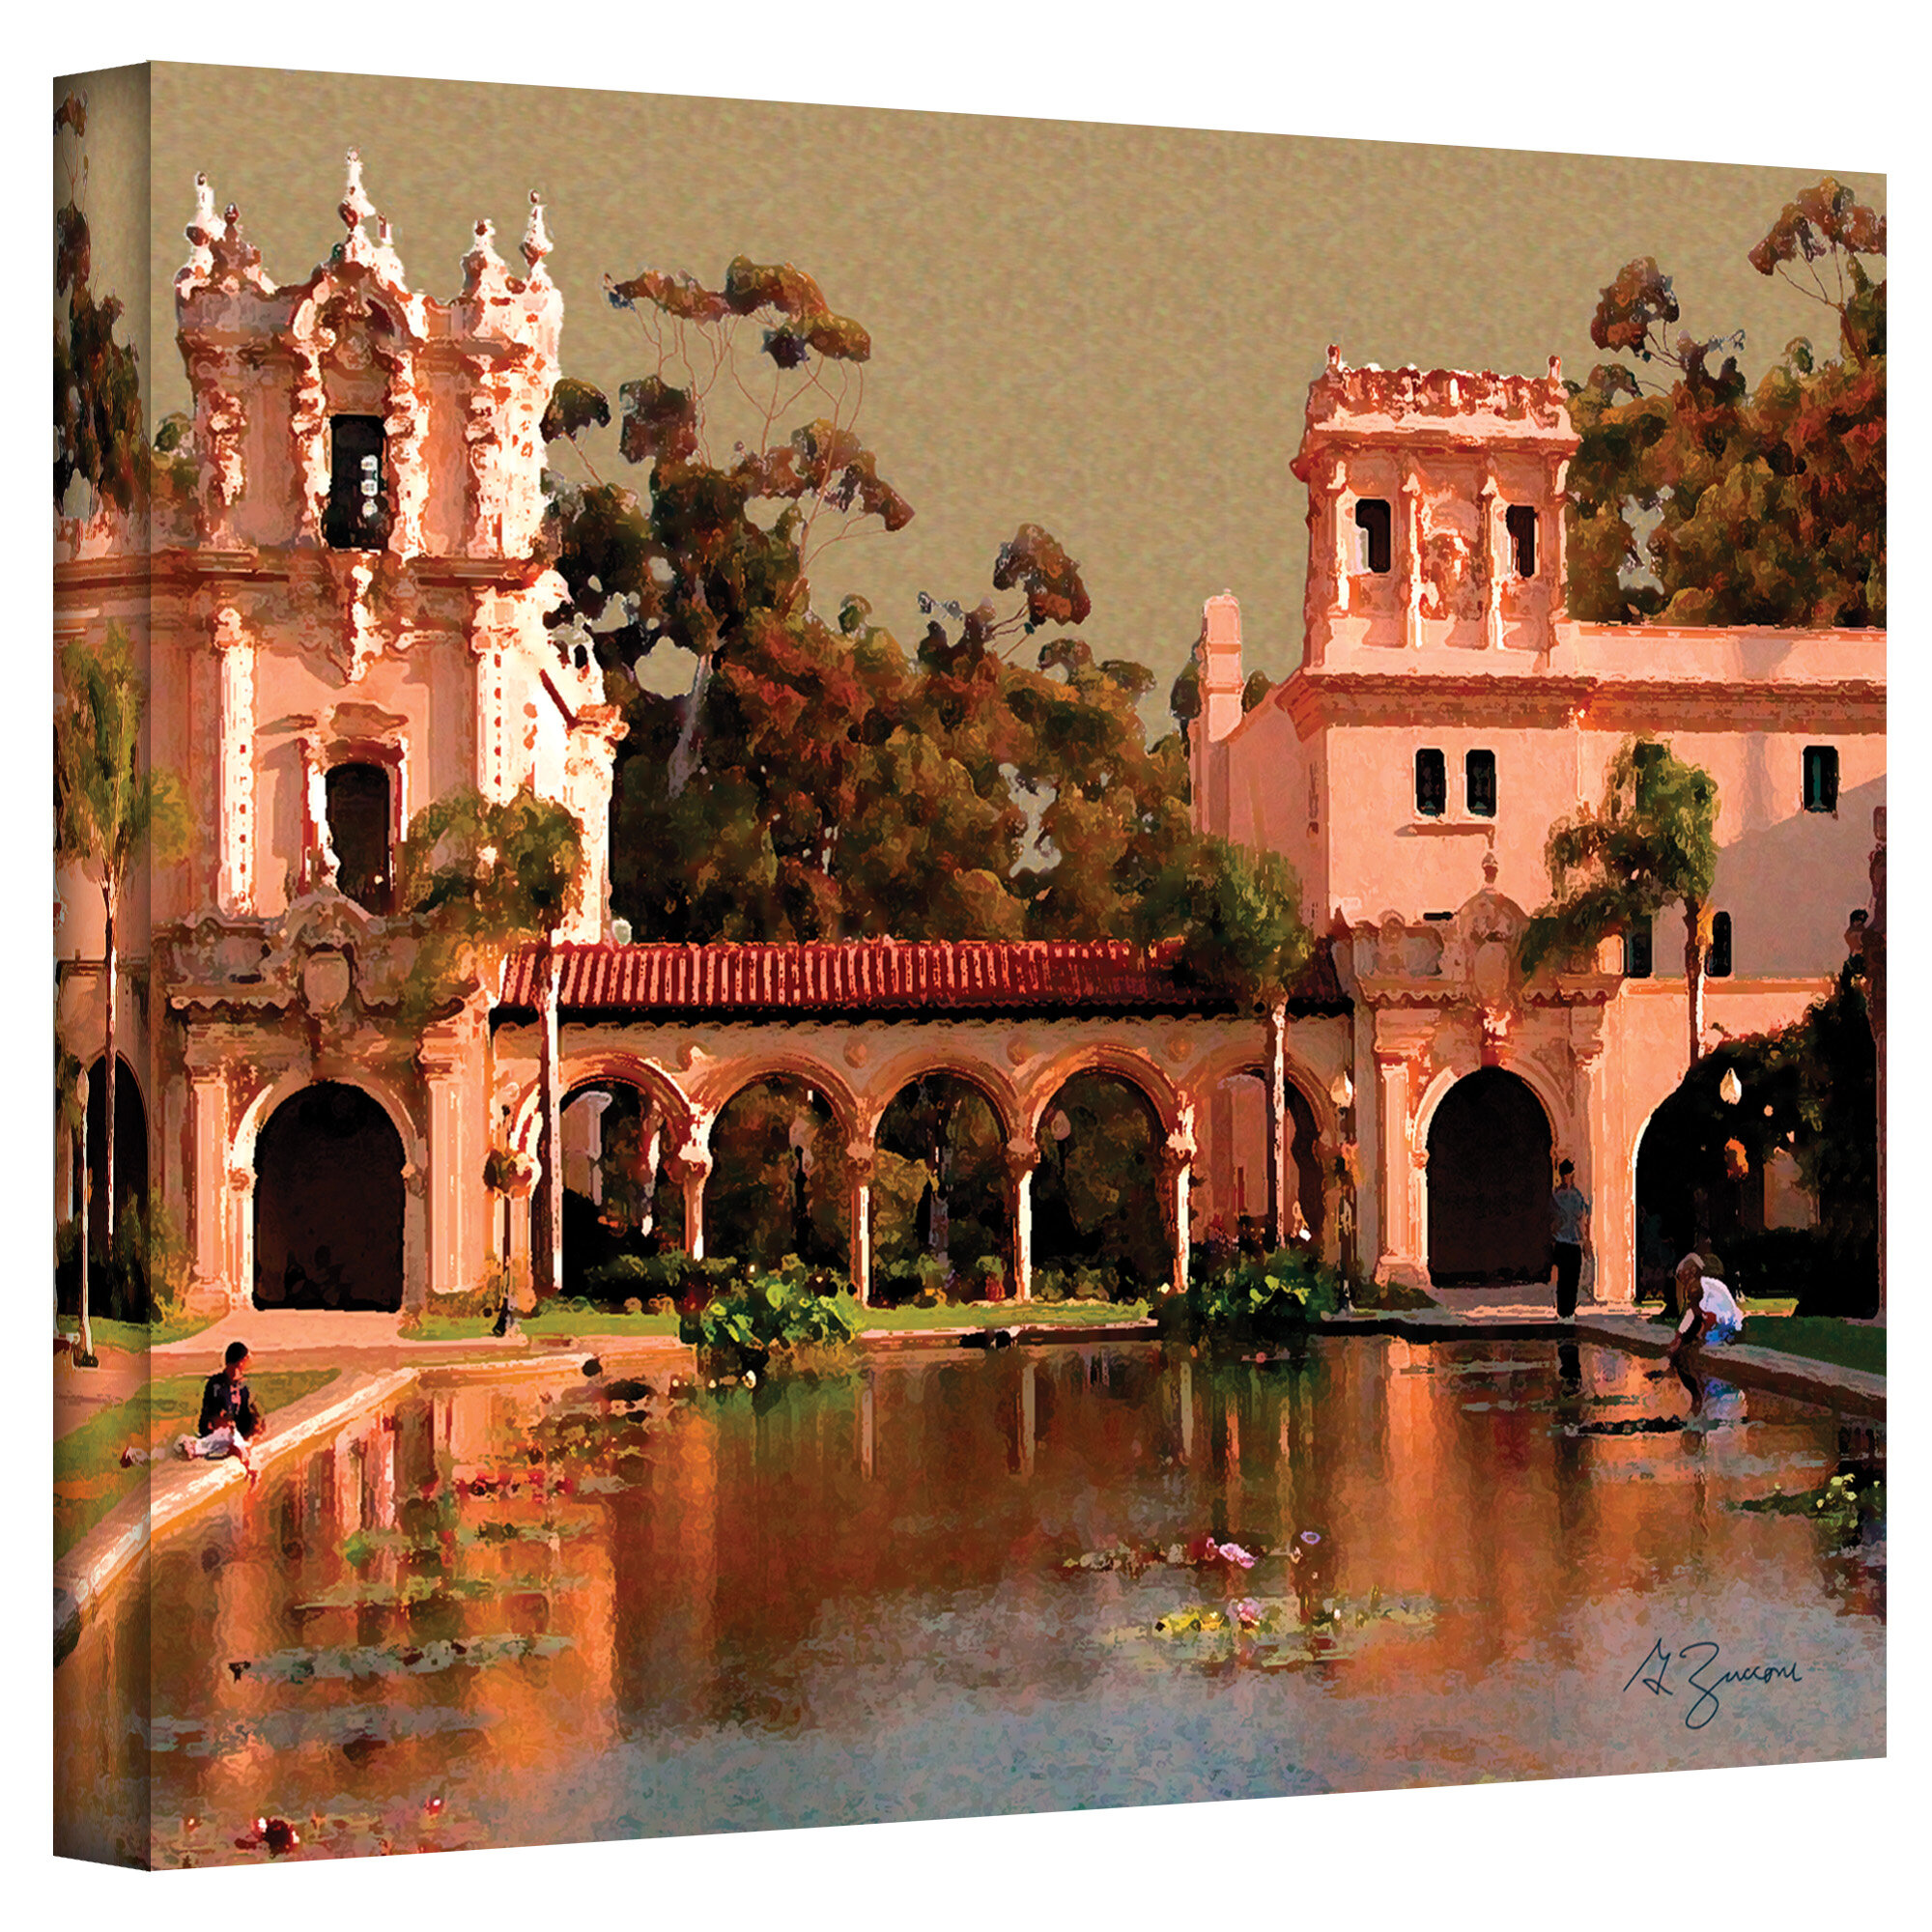 24 x 32 ArtWall 4 Piece George Zucconis Lily Pond Balboa Park Floater Framed Canvas Set 